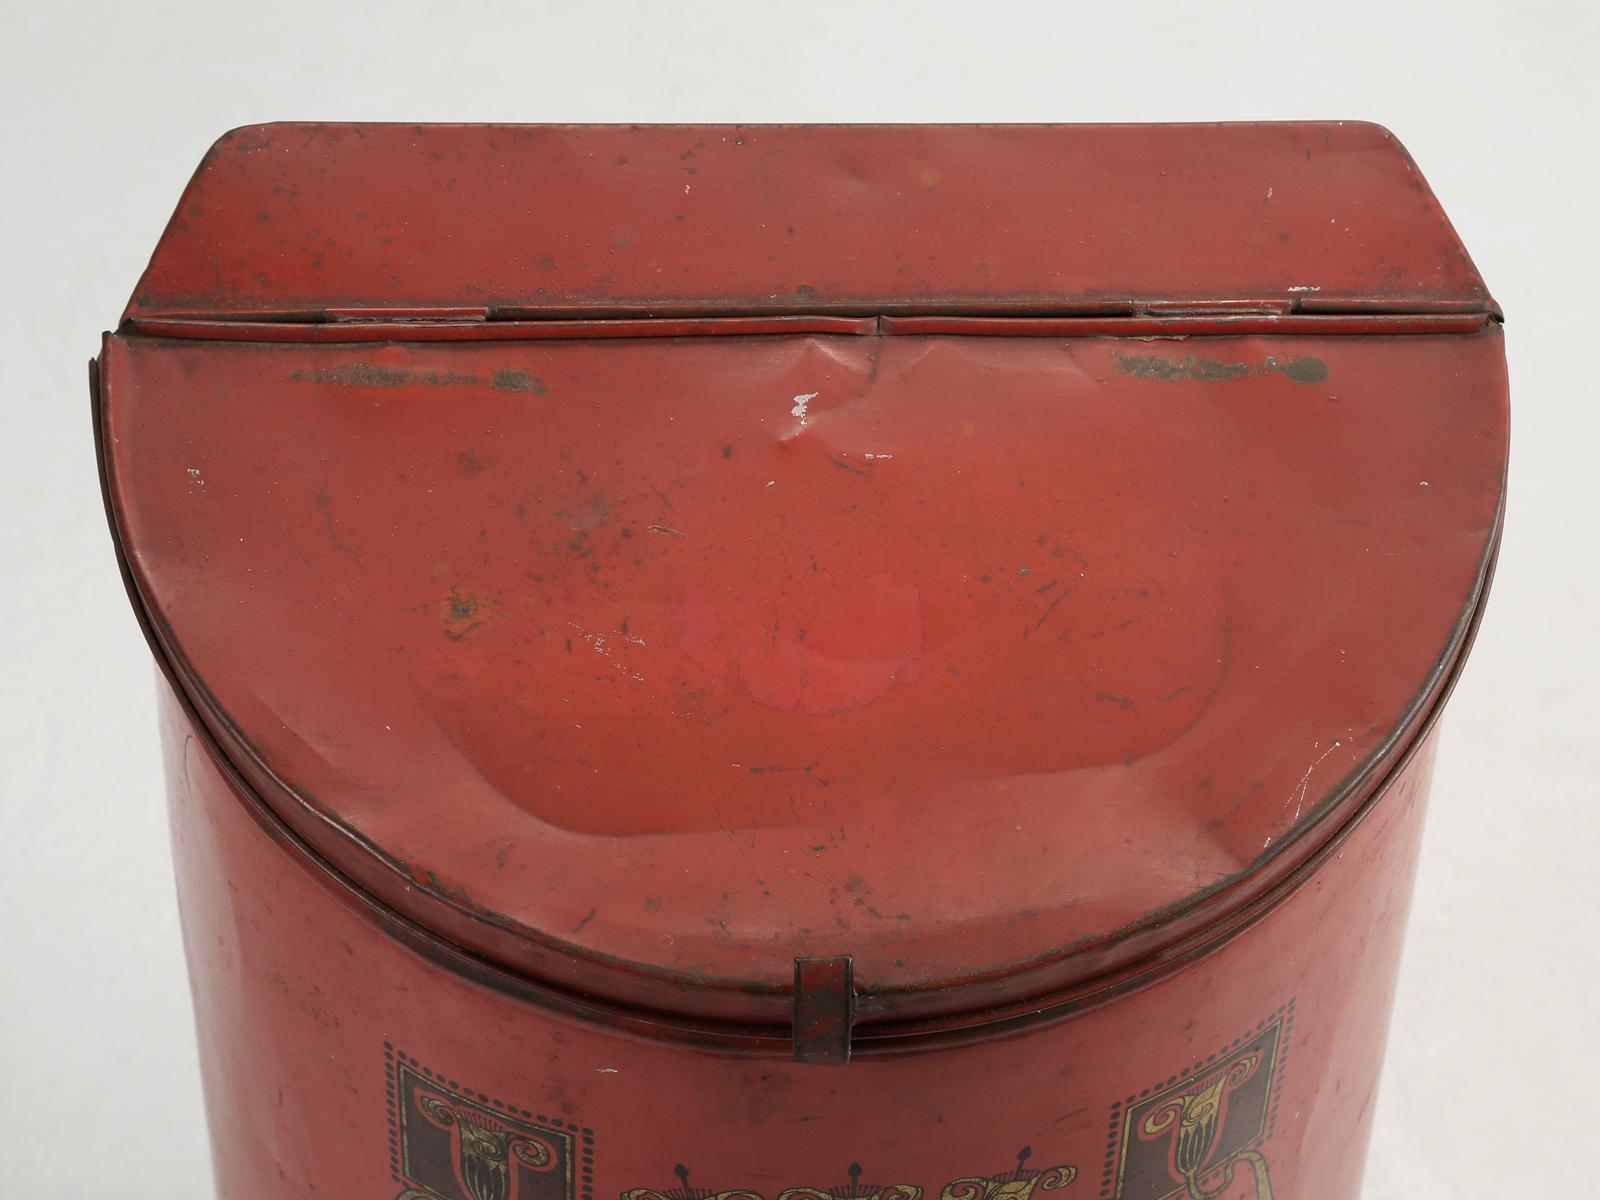 Very unusual Coffee bean dispenser that would have been used in a commercial application and now, ideally suited to decorate a country kitchen. All original paint with no modifications or restoration.